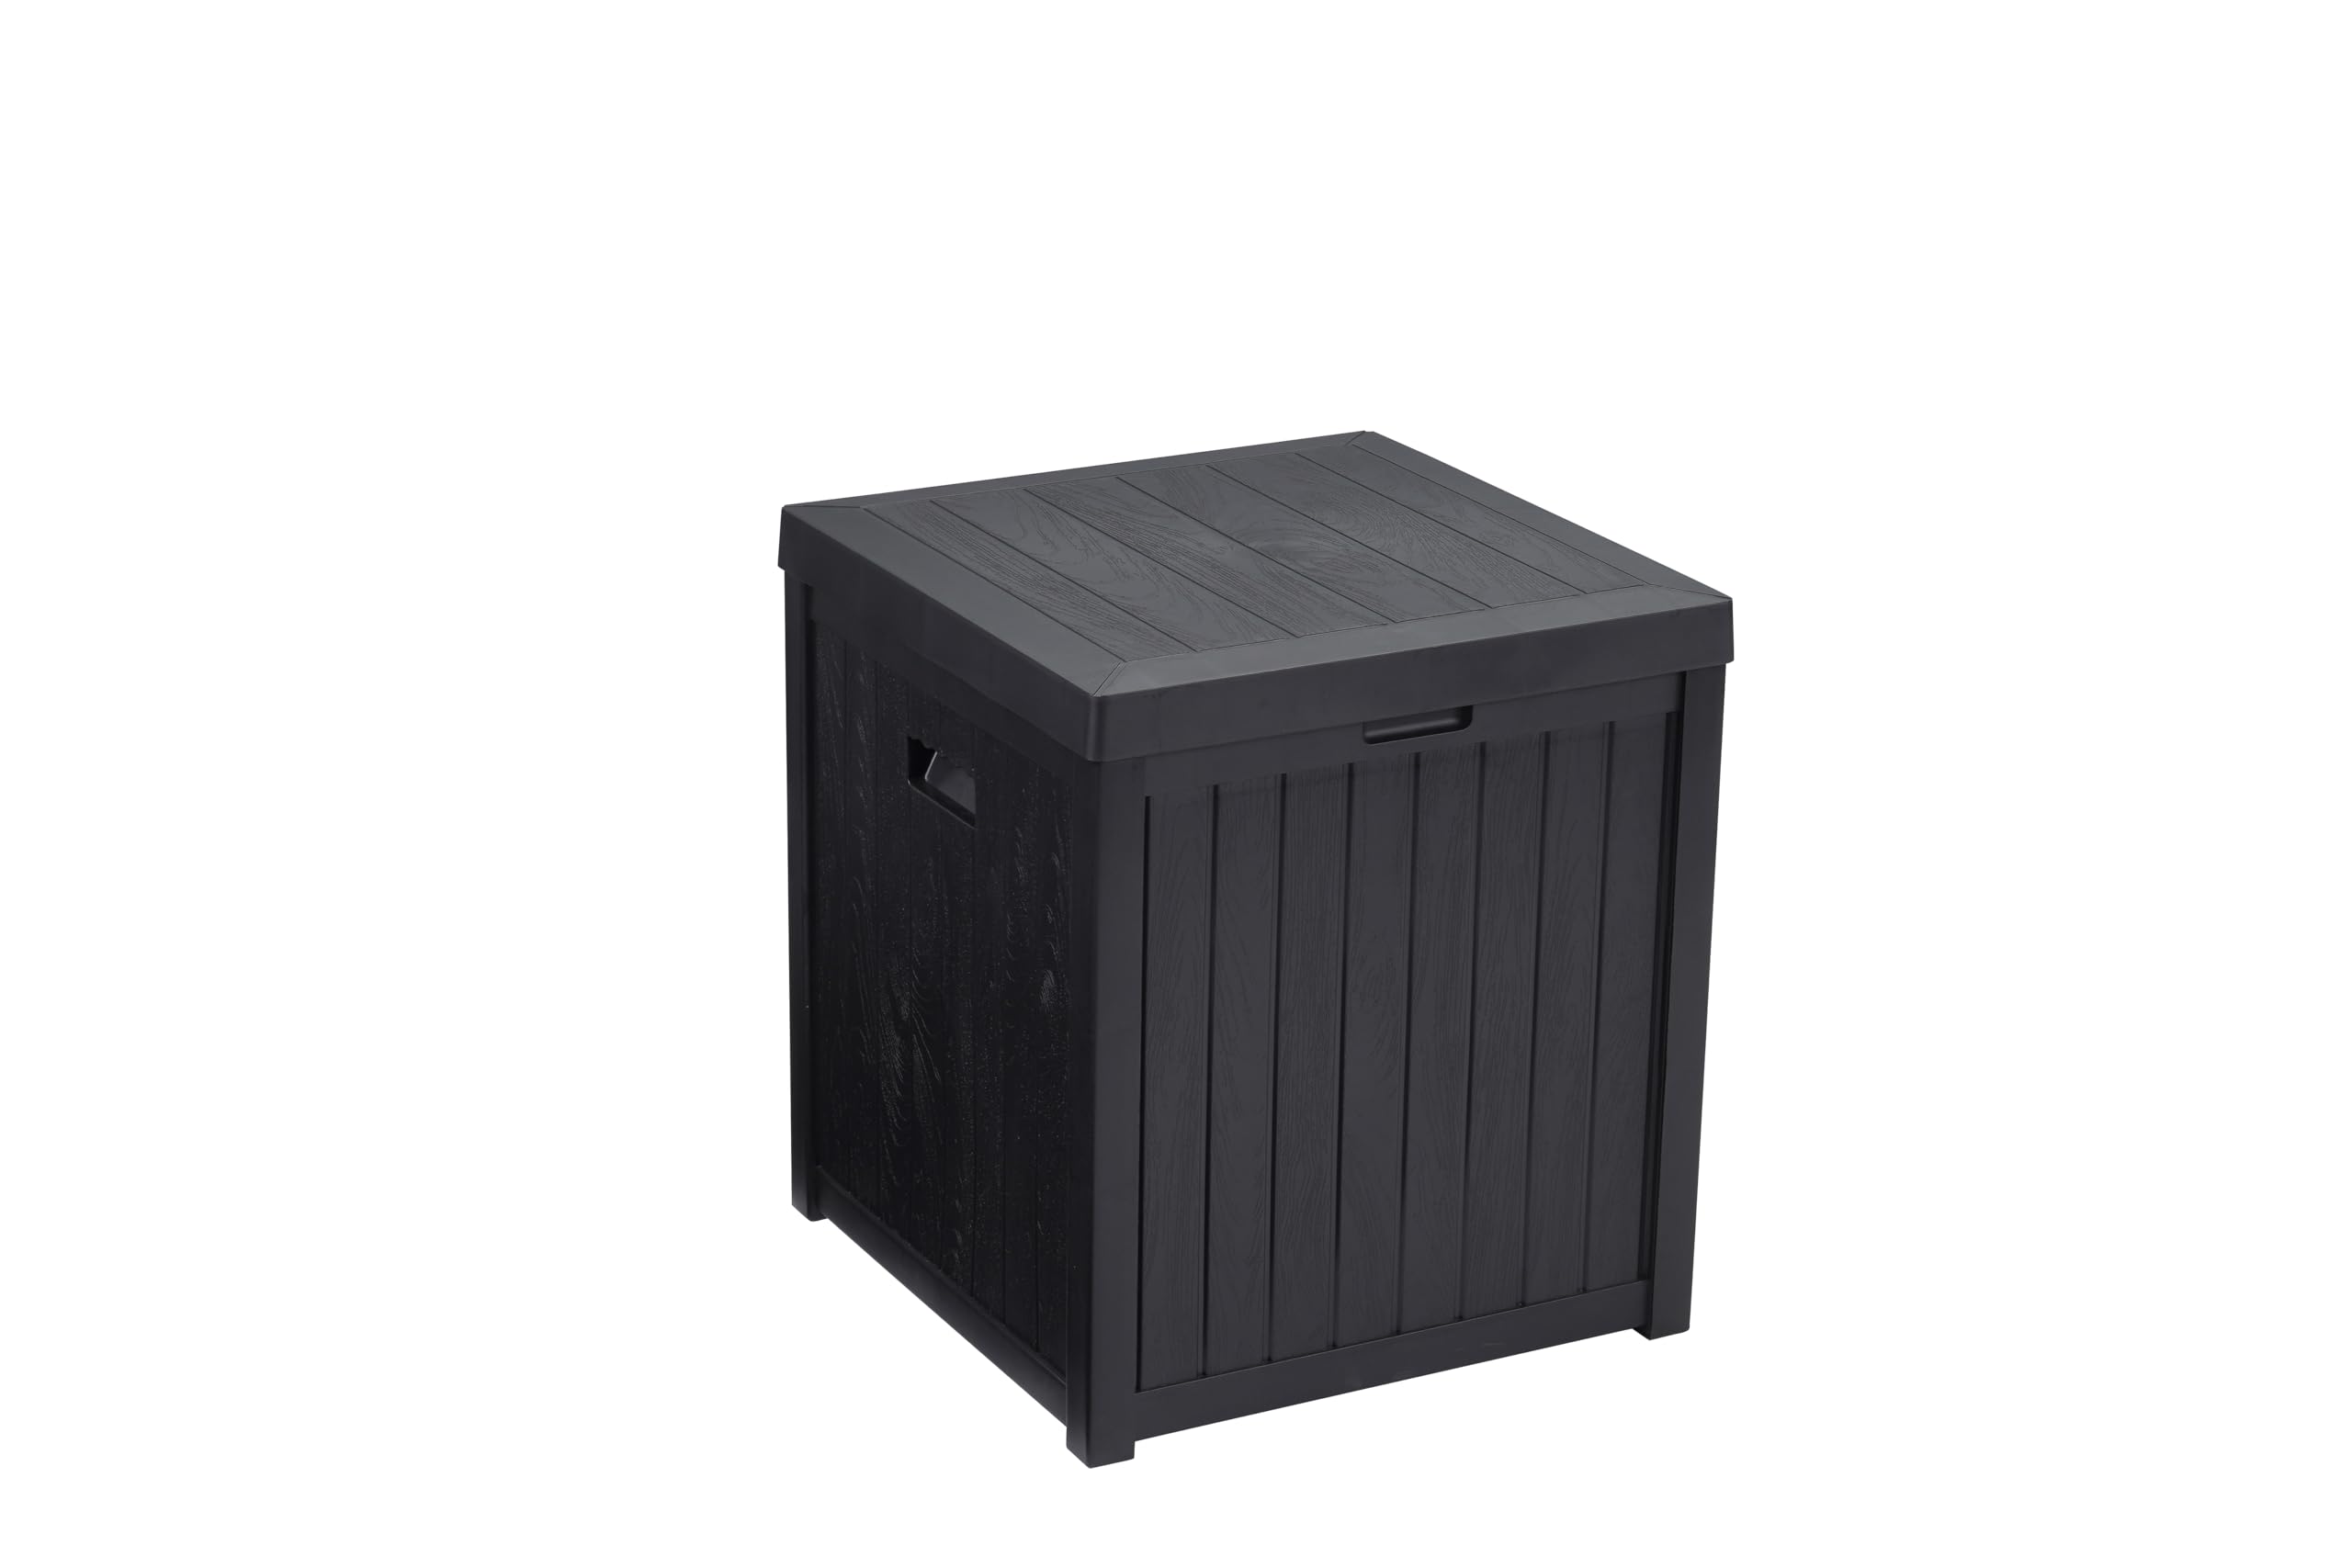 EHHLY Deck Box, 51 Gallon Front Porch Package Bin Delivery Box for Outside, Black